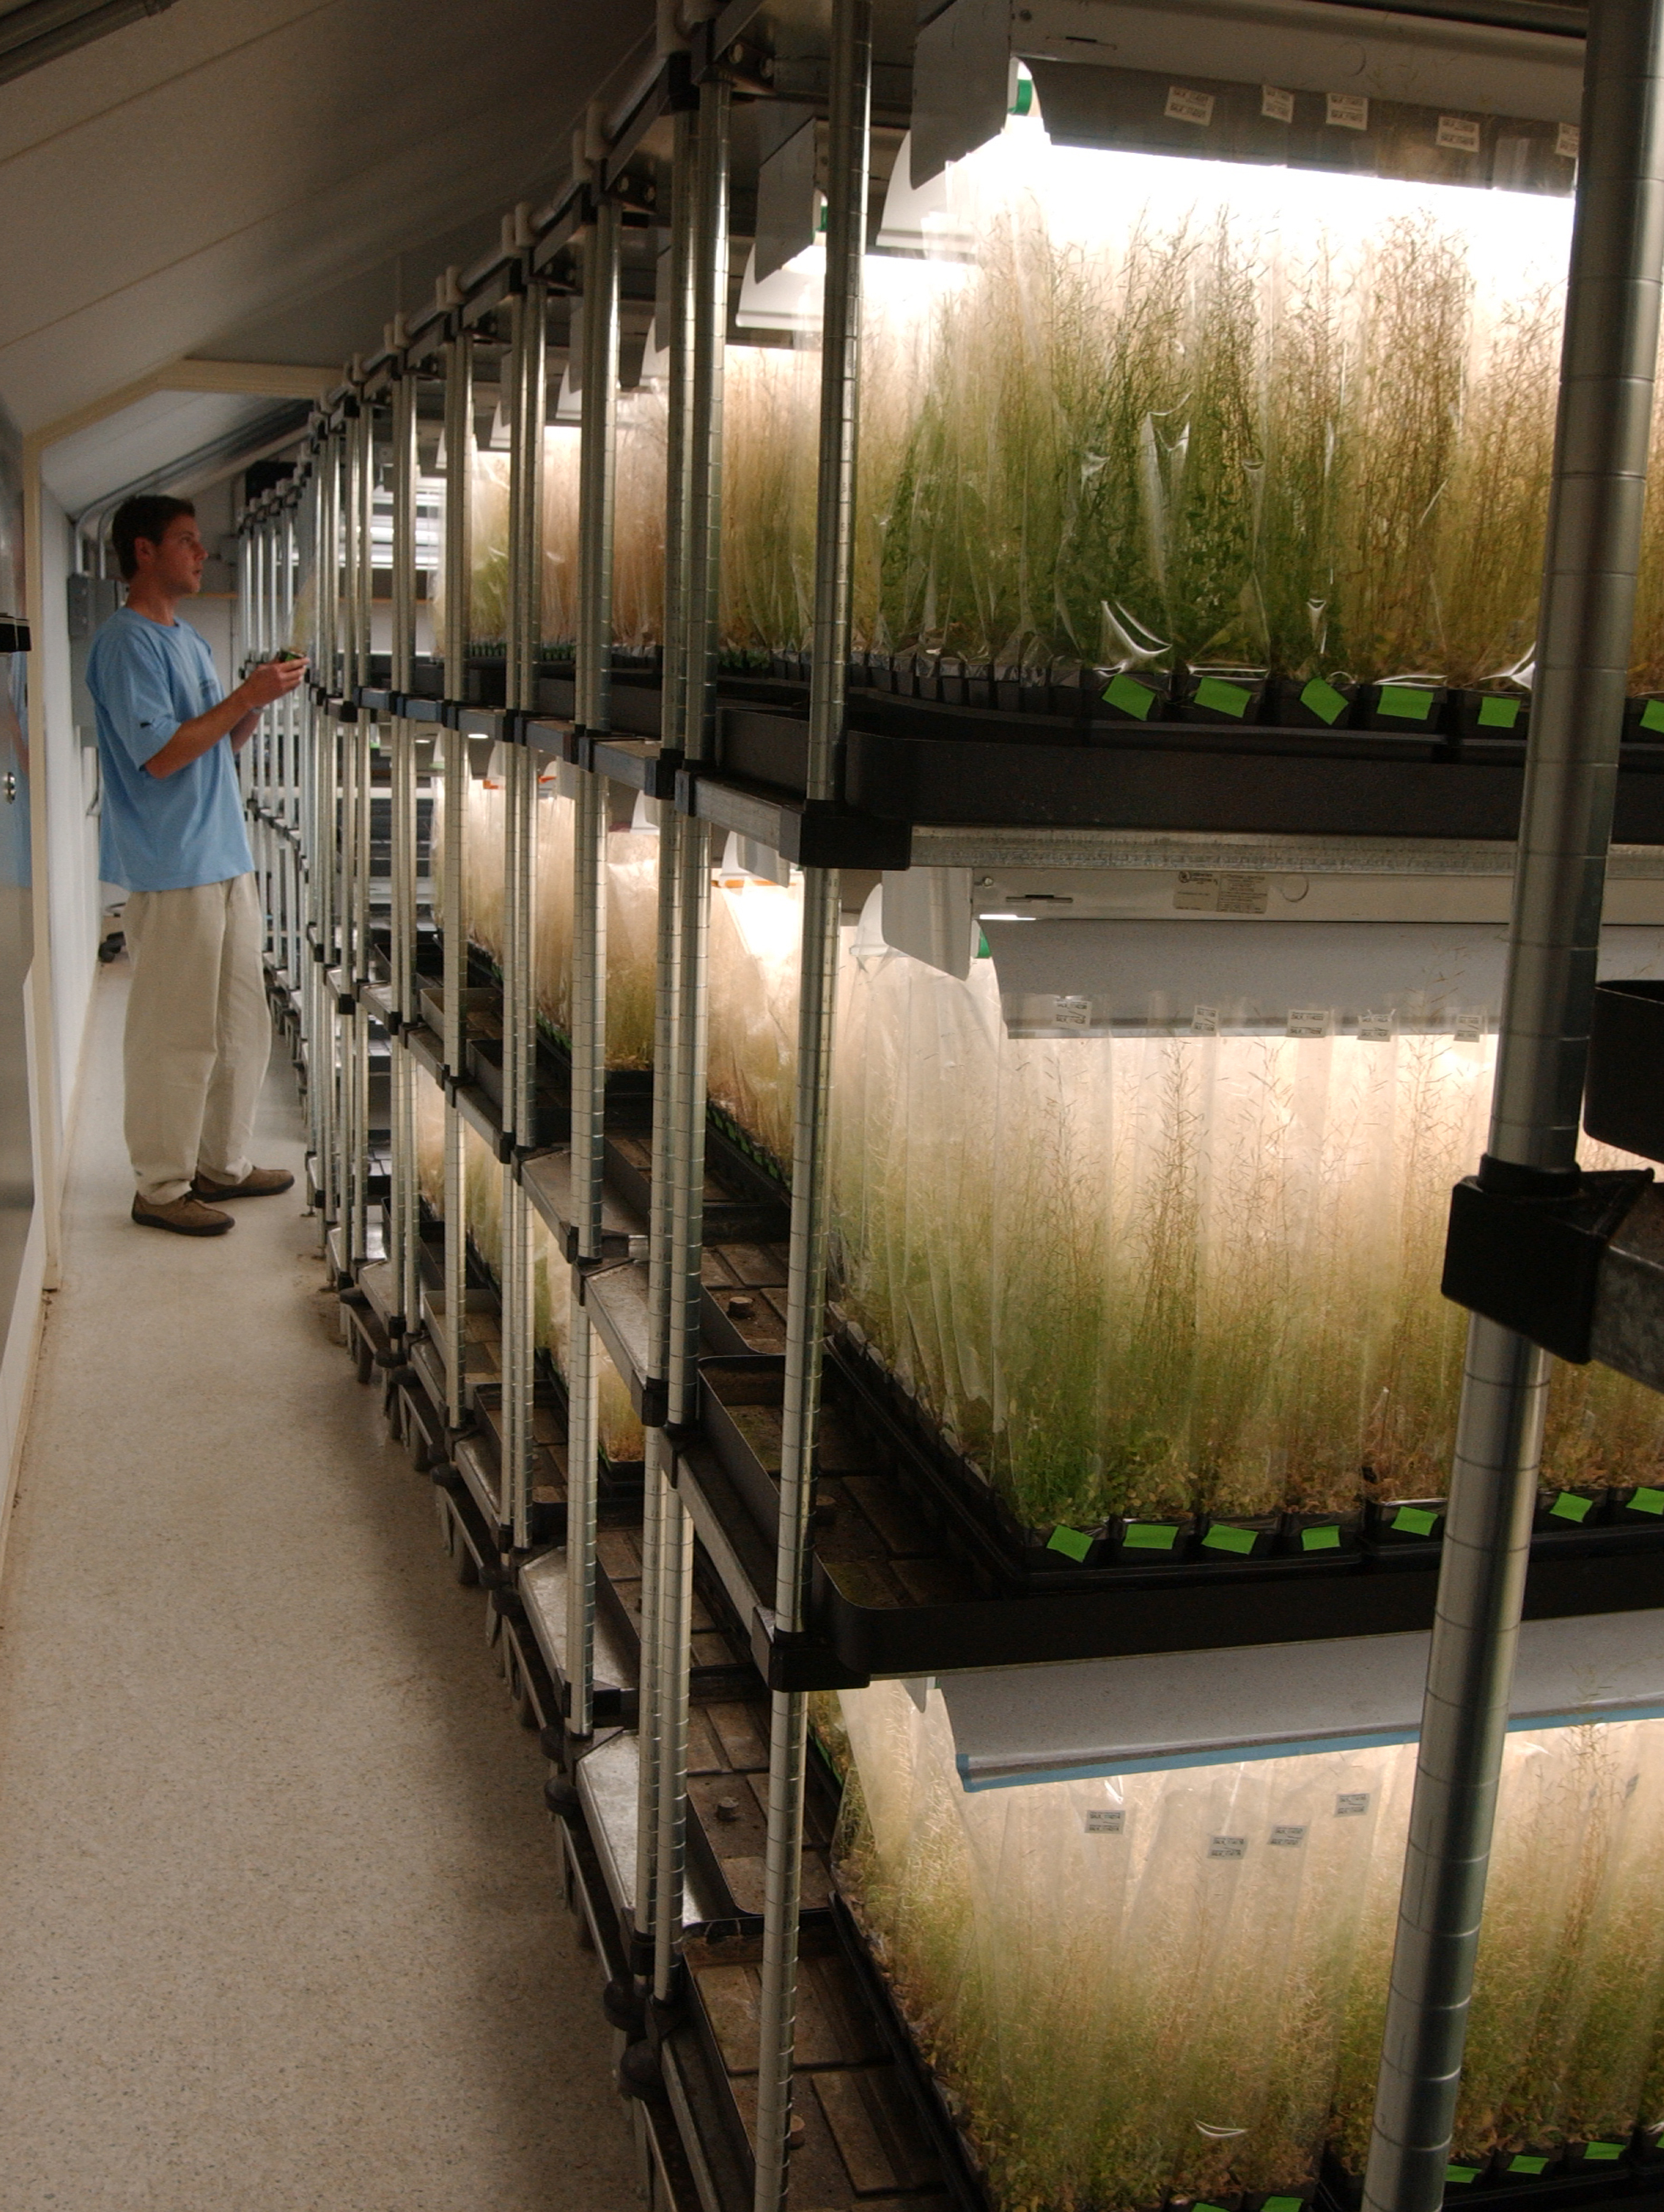 researcher and Arabidopsis plants; caption is below